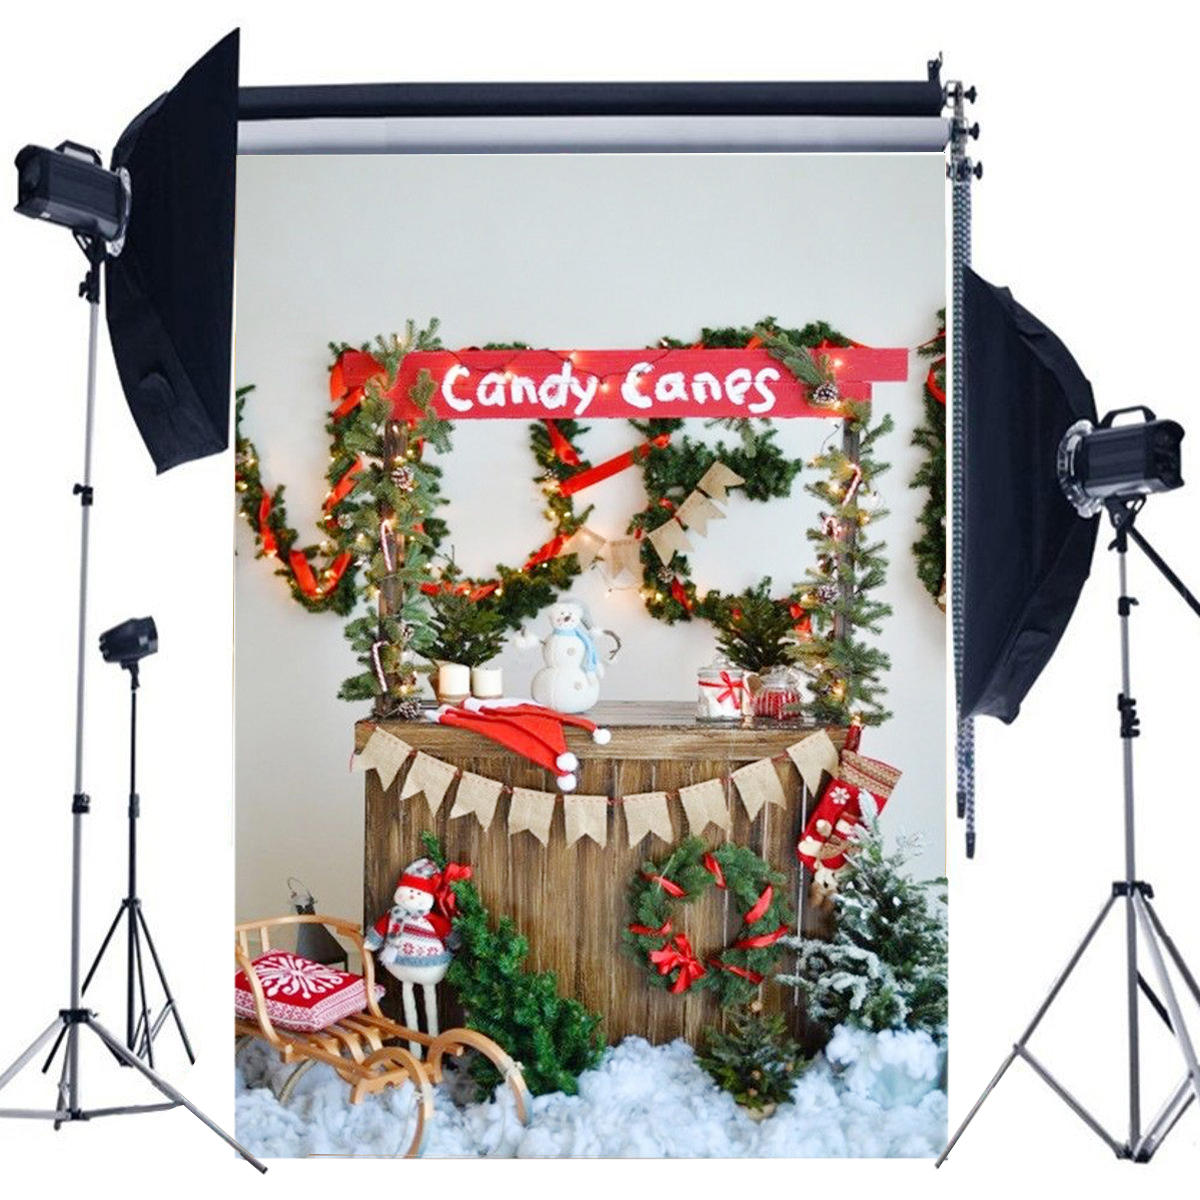 5x7FT Christmas Tree Snow Lights Flags Canned Candy Photography Backdrop Studio Prop Background